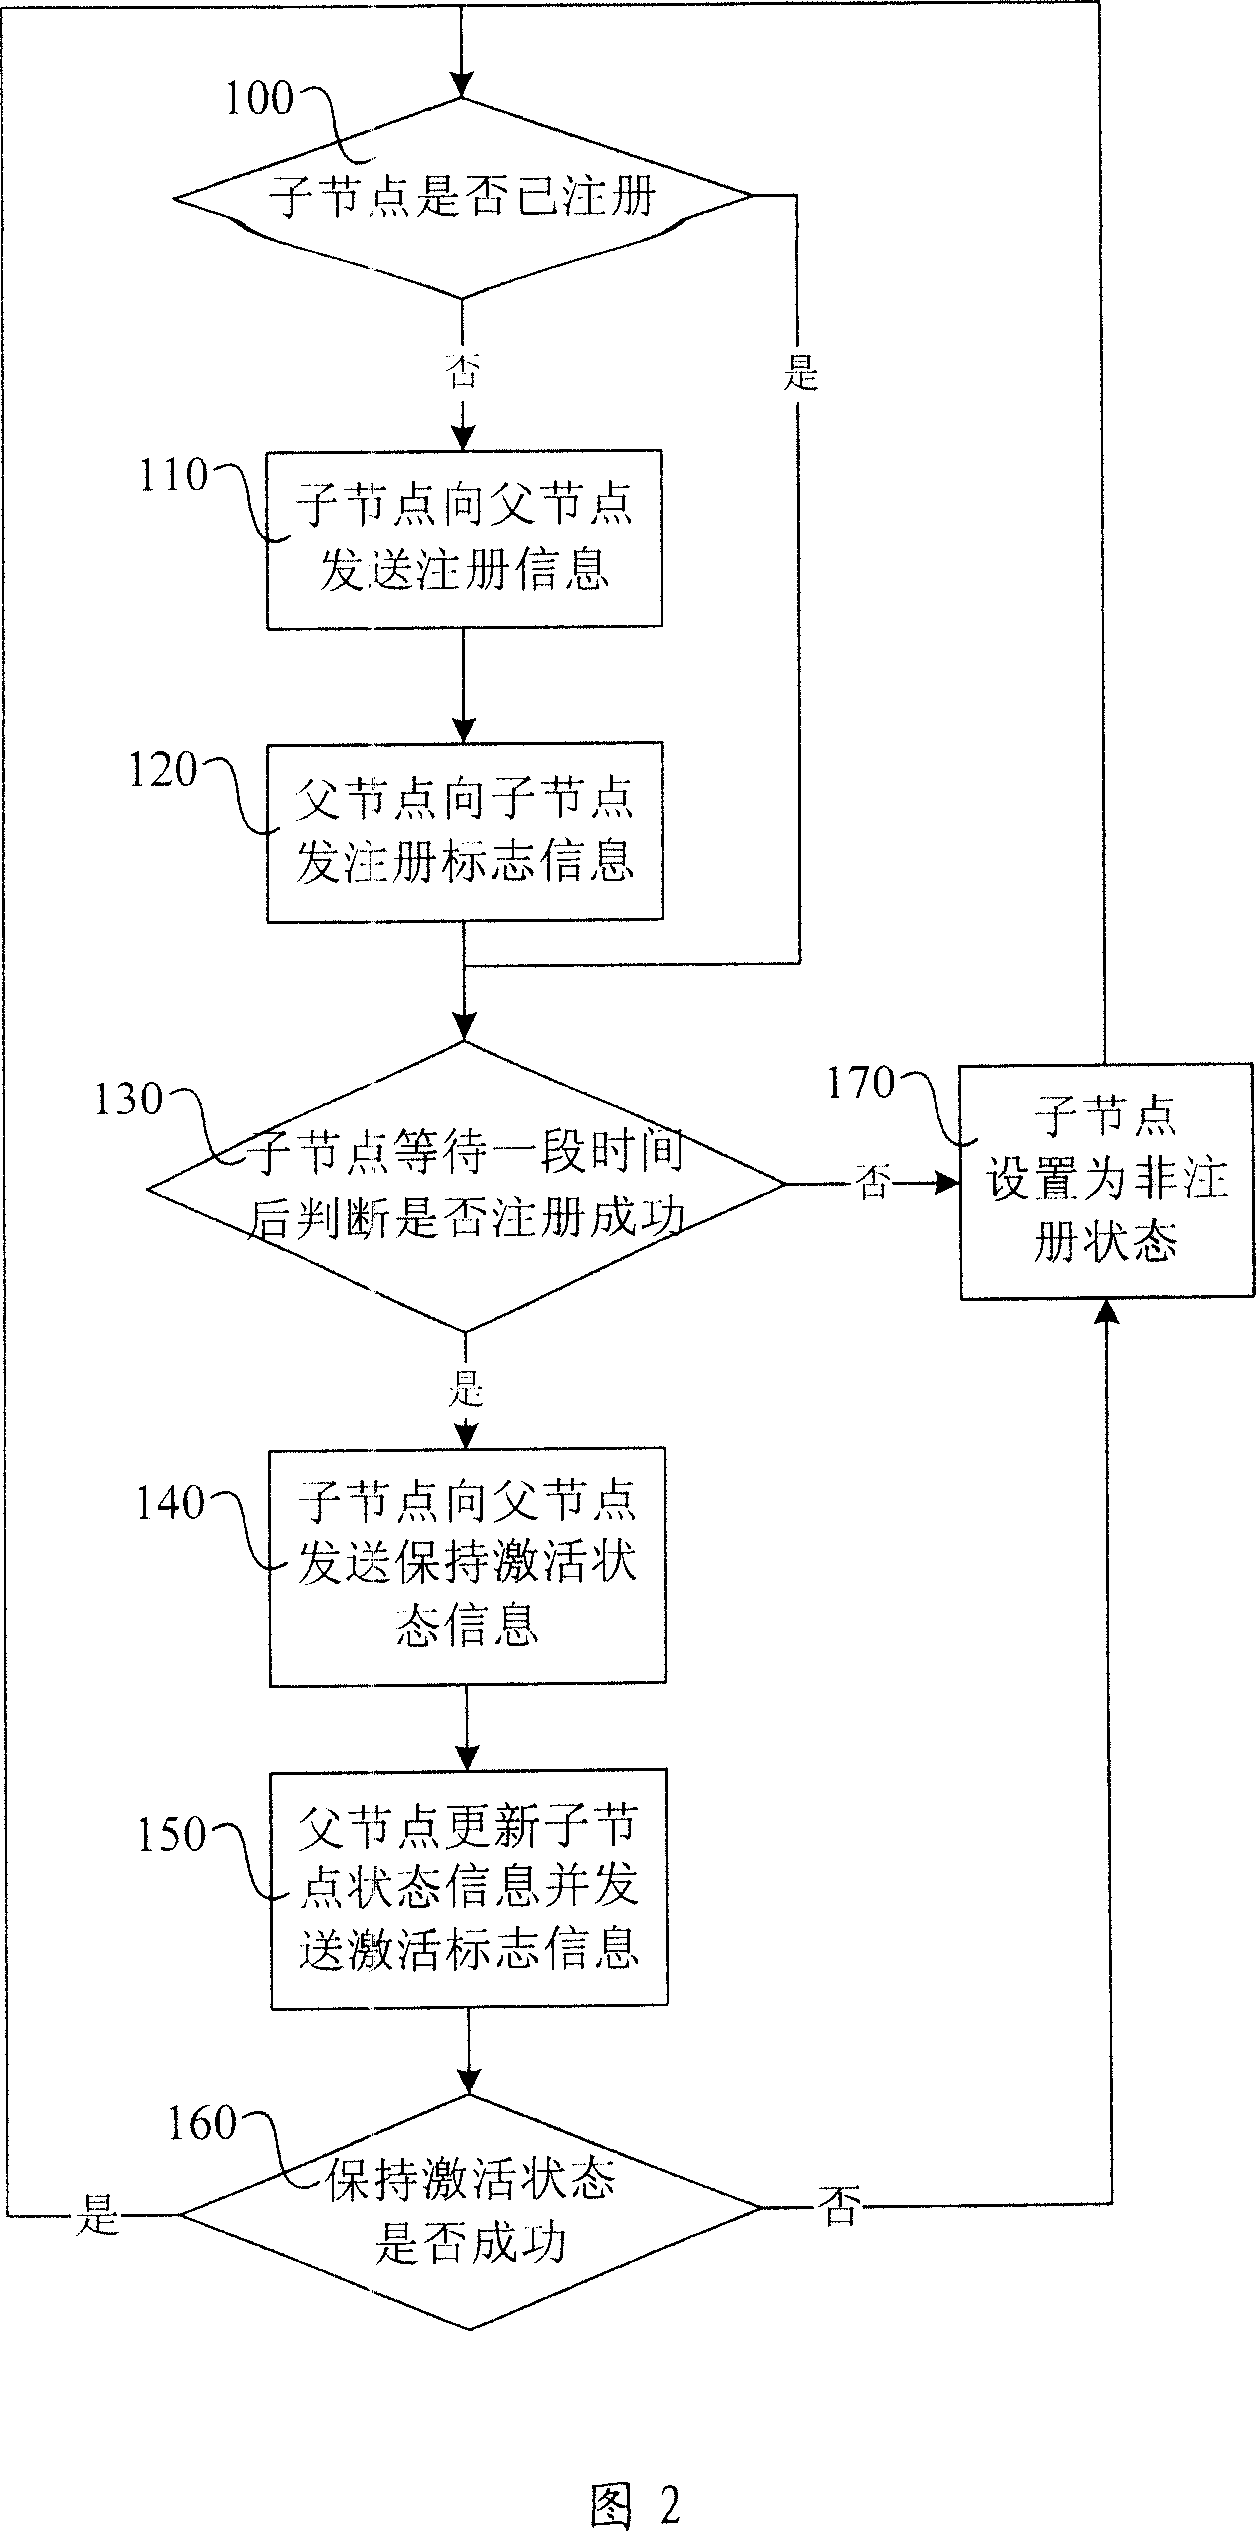 Gridding information service system and its information processing method